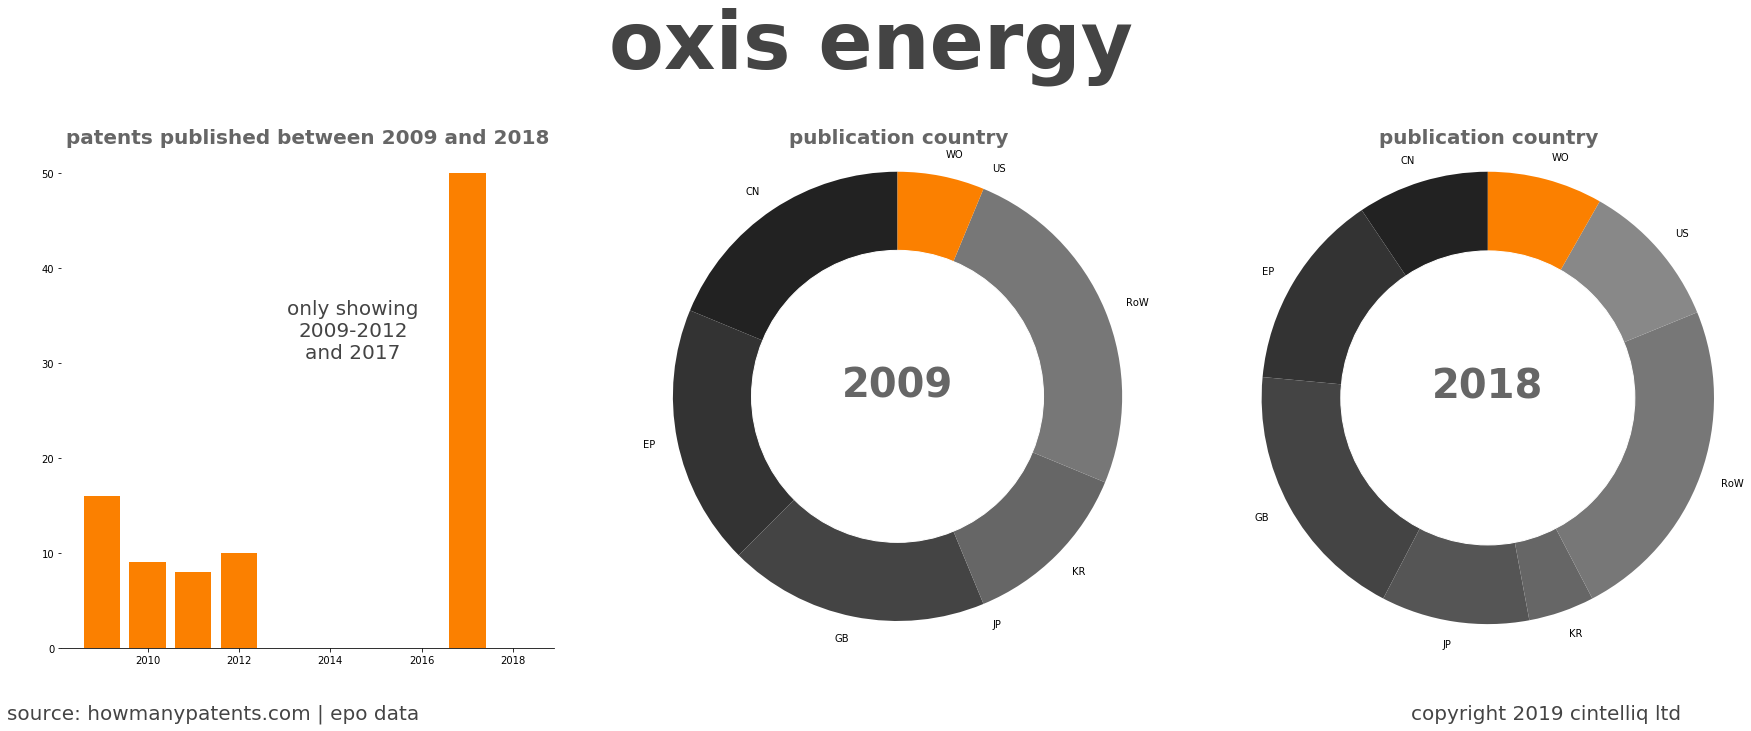 summary of patents for Oxis Energy